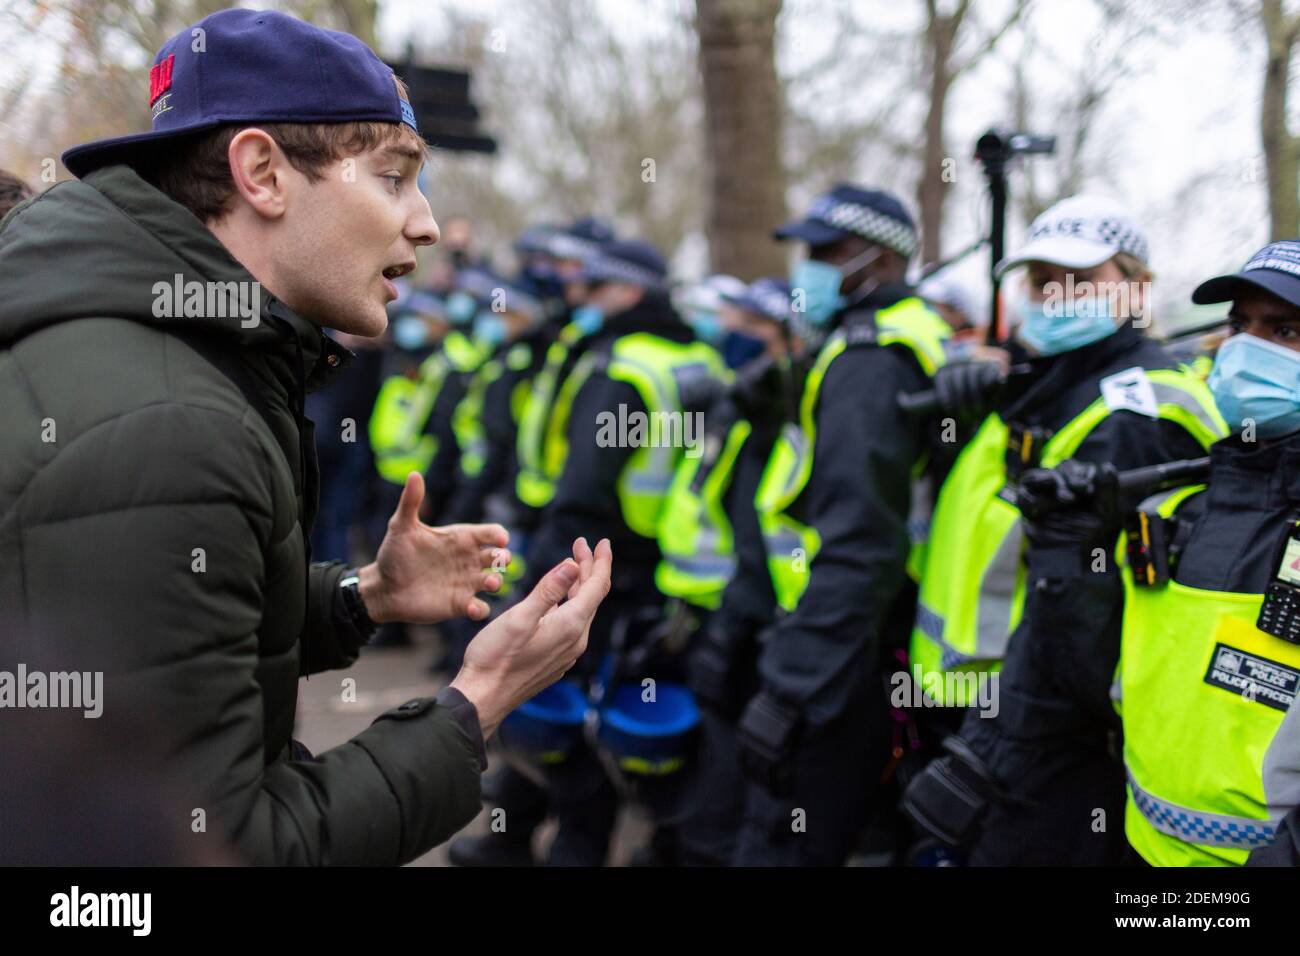 Anti-lockdown protest, Hyde Park, London, 28 November 2020. A protester converses with police officers maintaining a blockade. Stock Photo